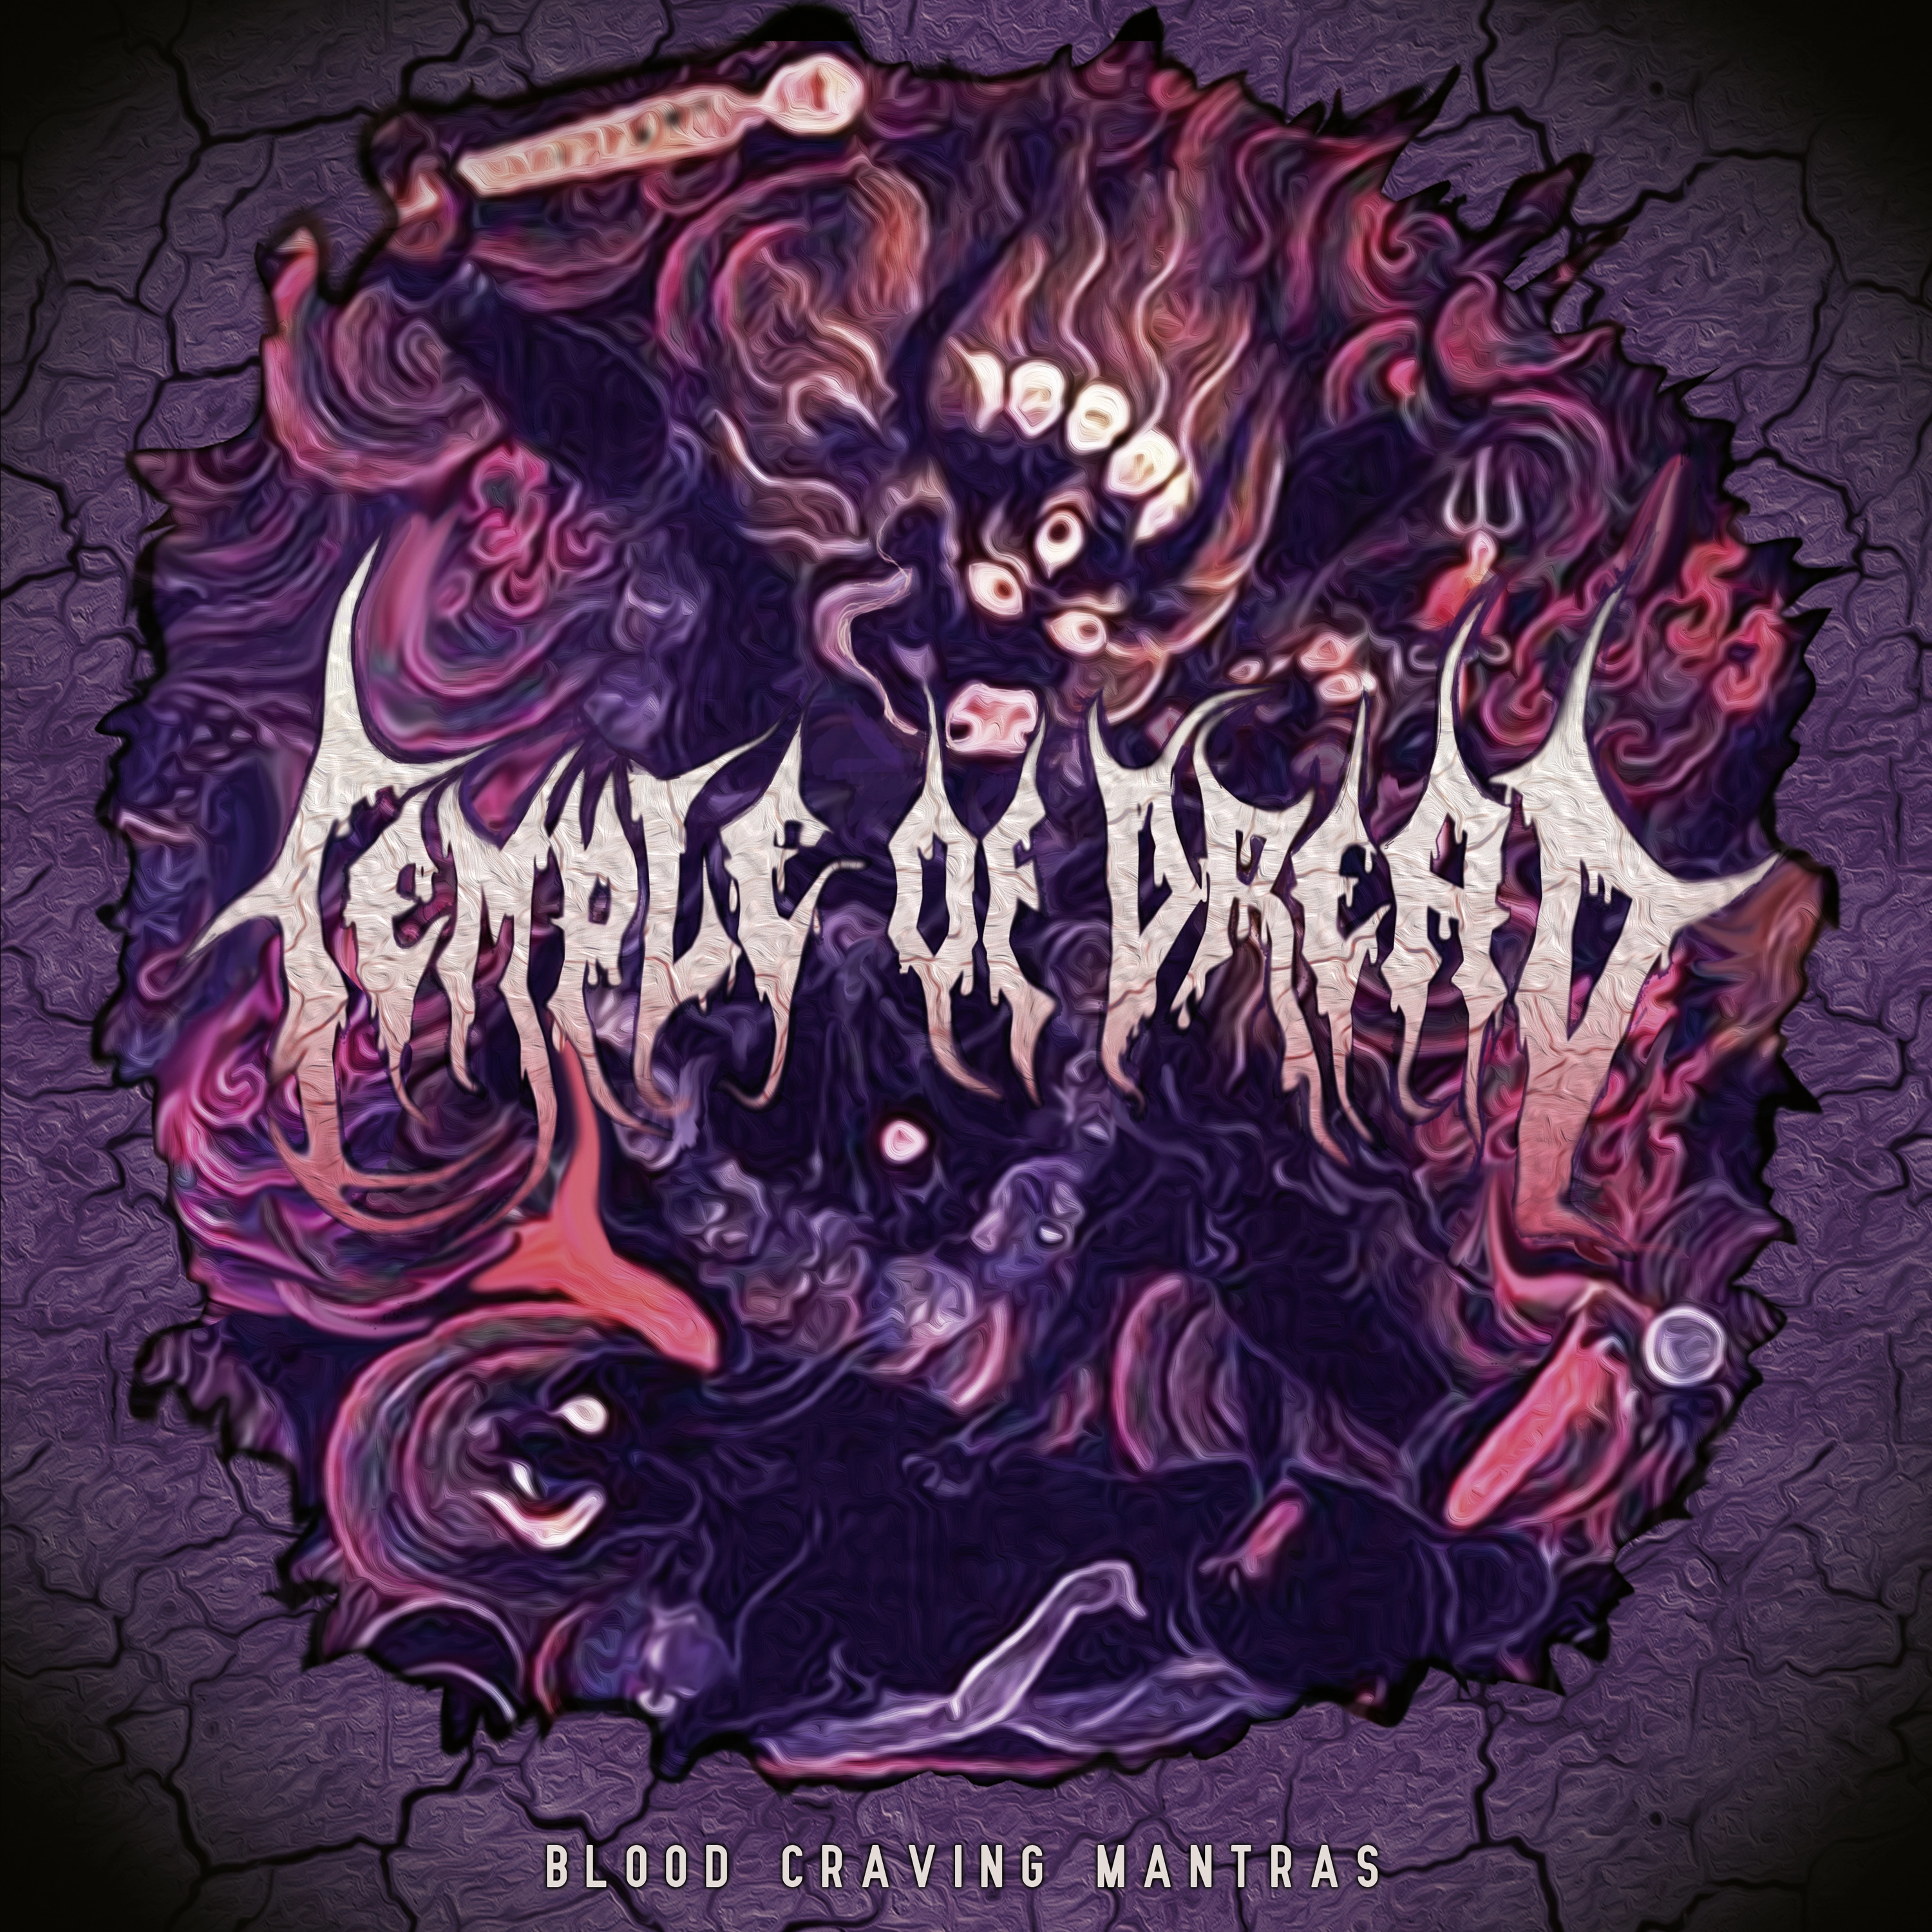 TEMPLE OF DREAD - Blood Craving Mantras  [CD] - Photo 1/1